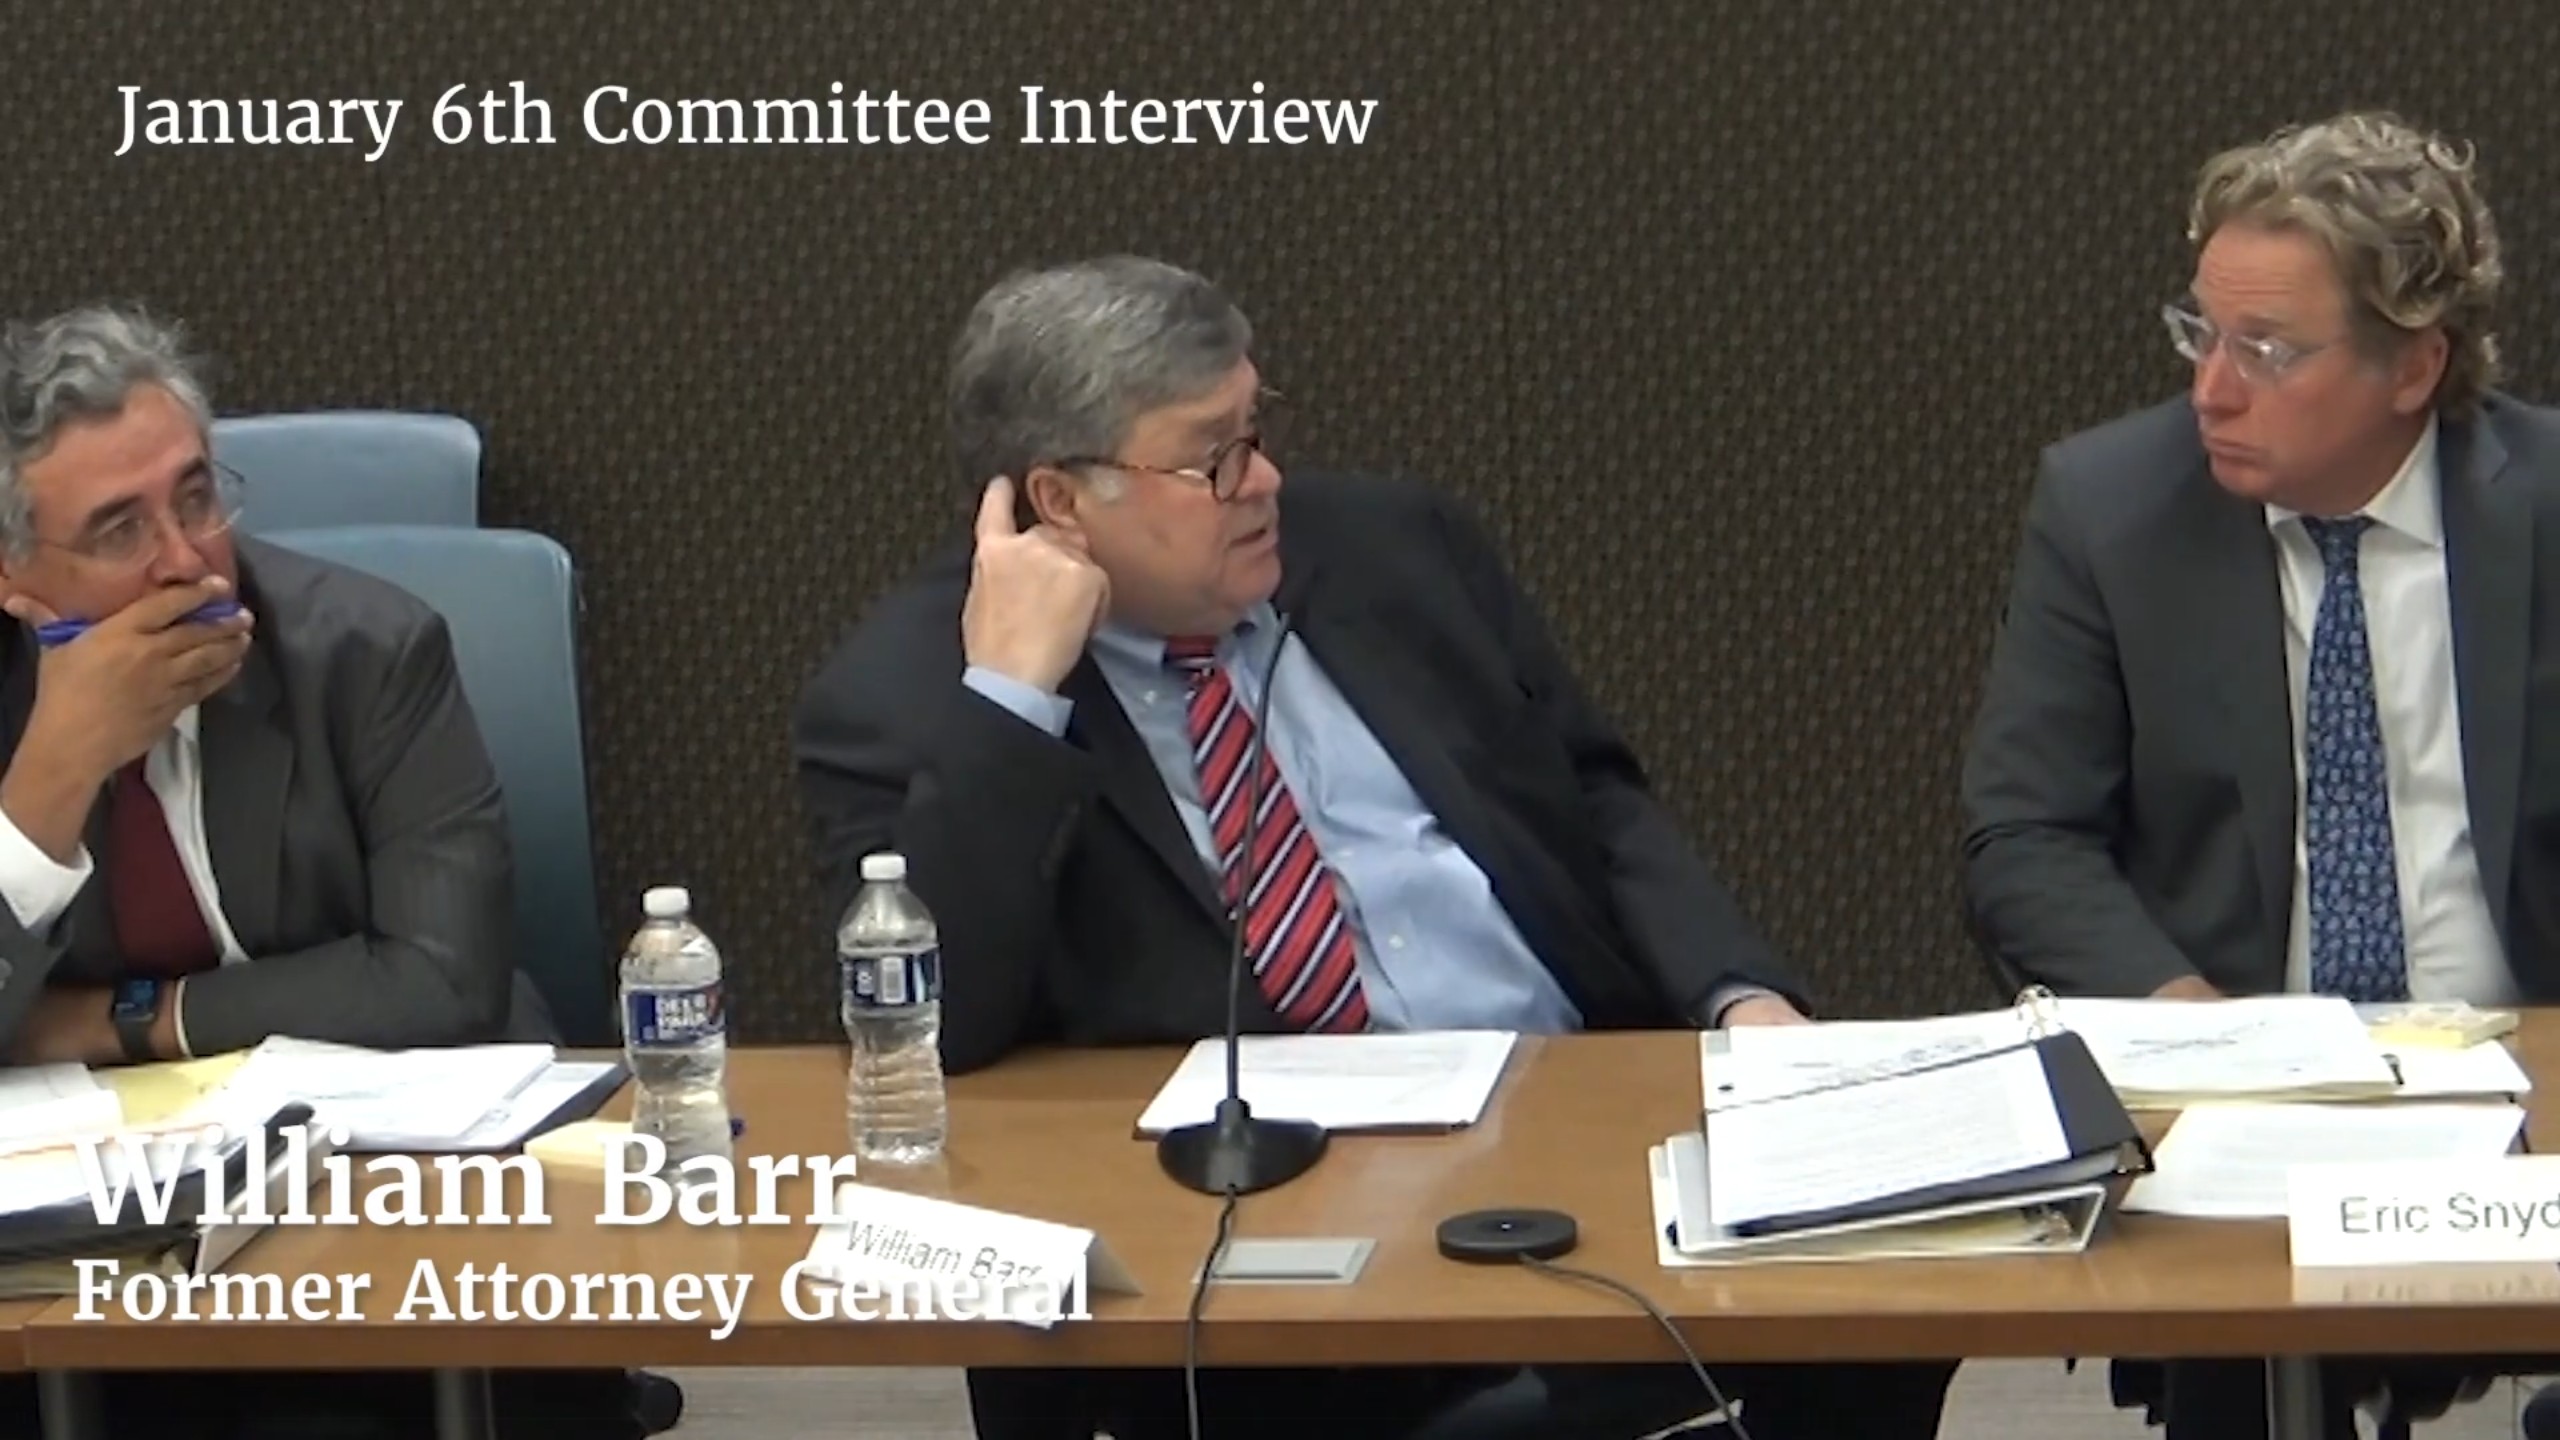 Bill Barr interview with January 6th Committee